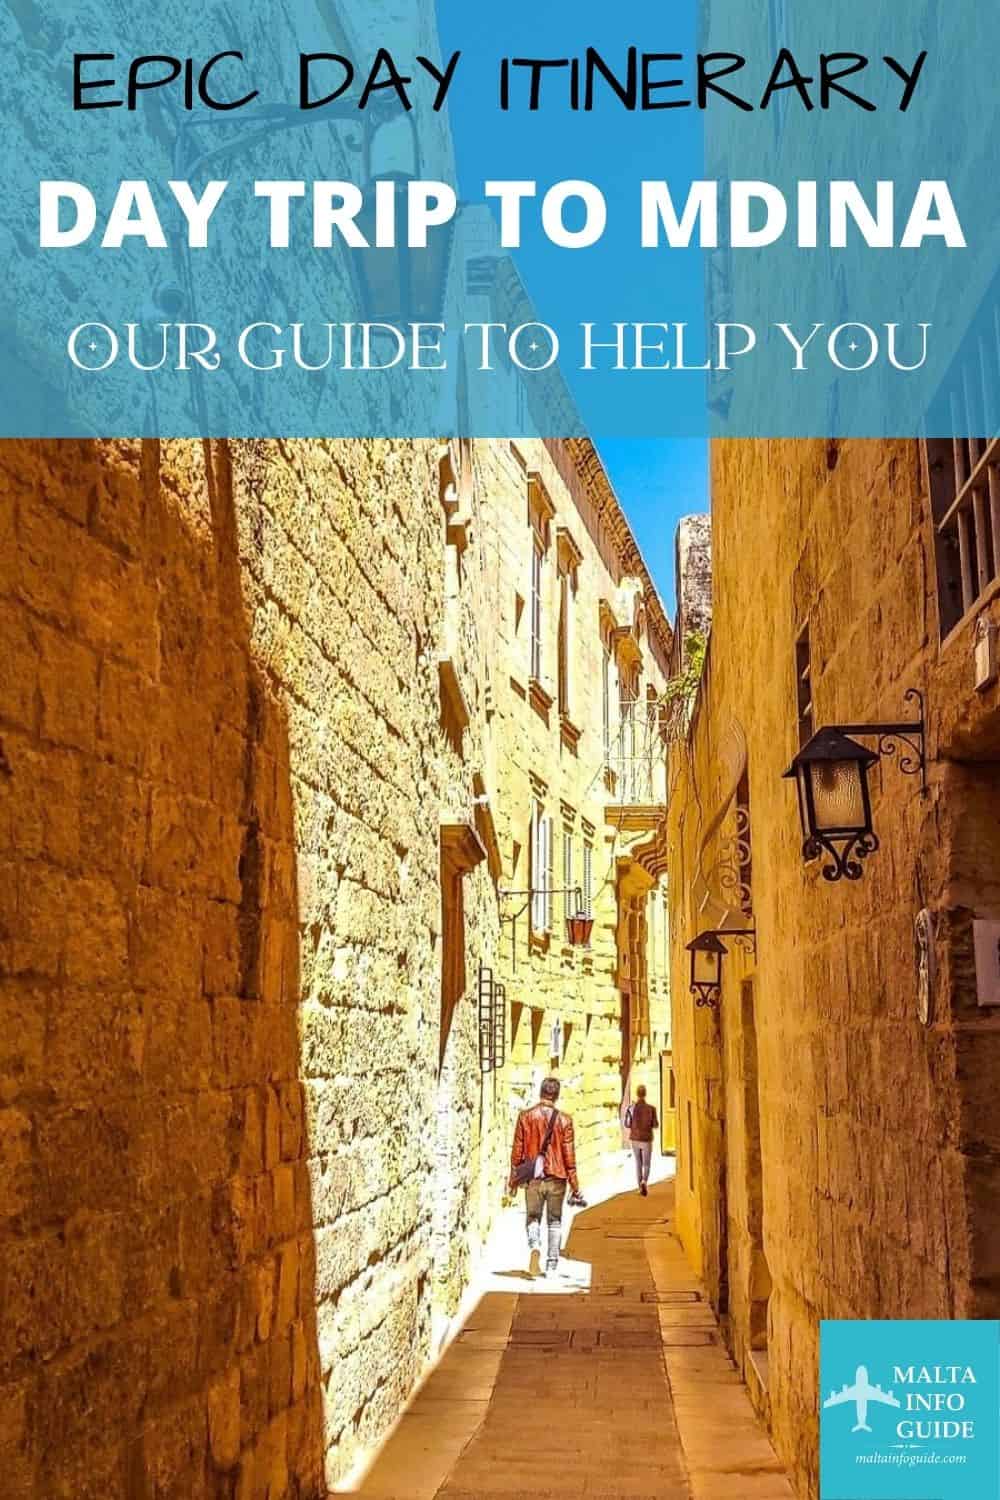 Here is our day trip itinerary for the city of Mdina in Malta. Use this guide to help visit most of the city.